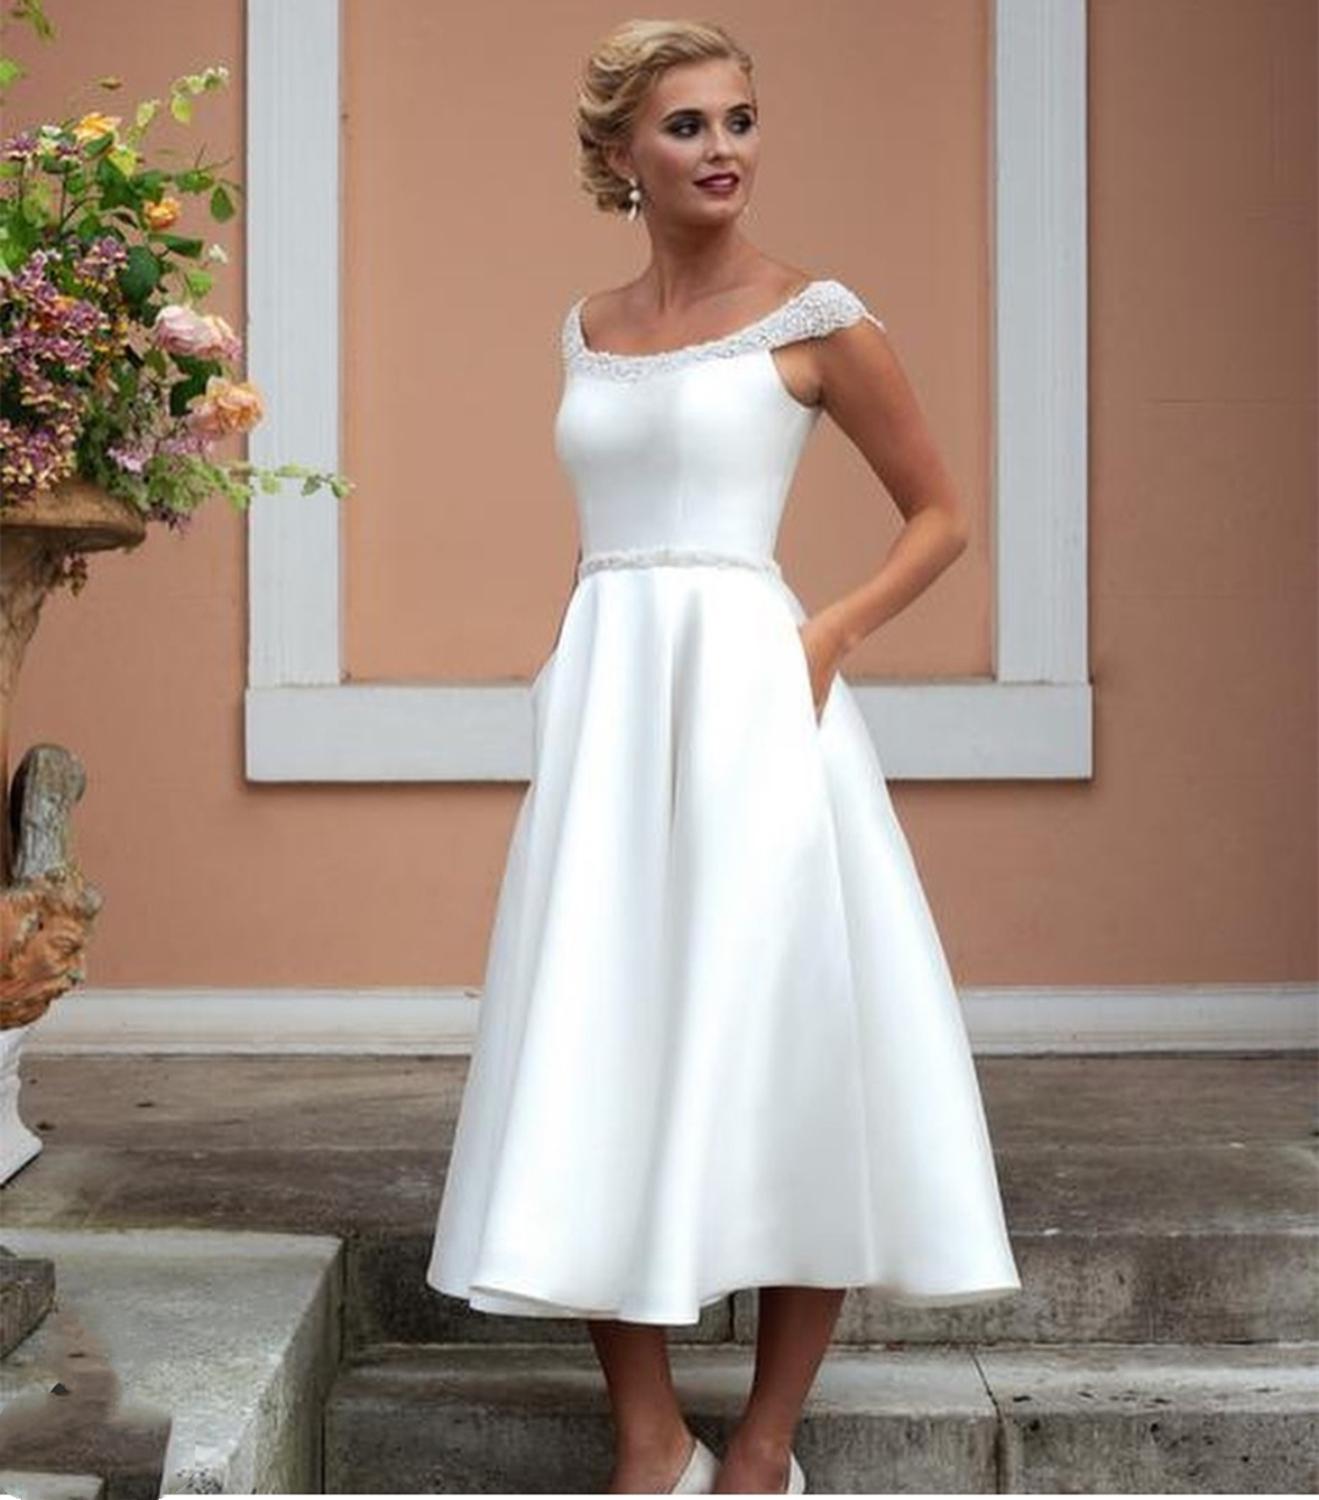 Short Wedding Dresses Satin Knee  Length With Crystal Beading Bridal Gowns With Pocket Elegant Simple Scalloped Cap Sleeve 2021